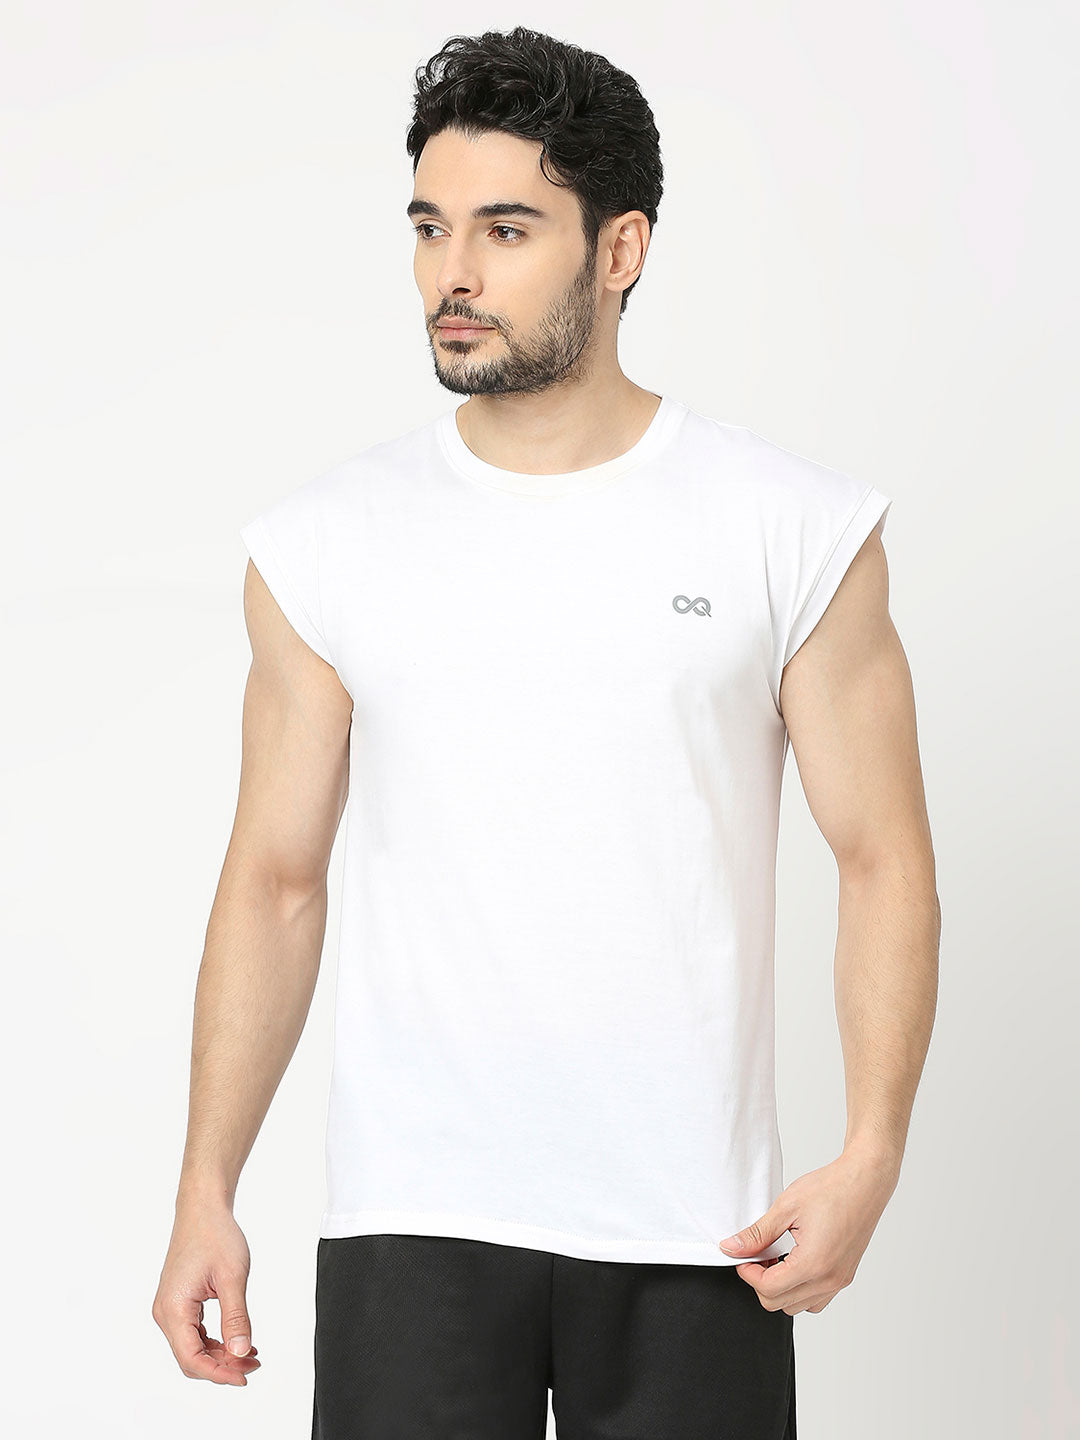 Shop Men's White Sports Vest - Stay Cool and Comfortable